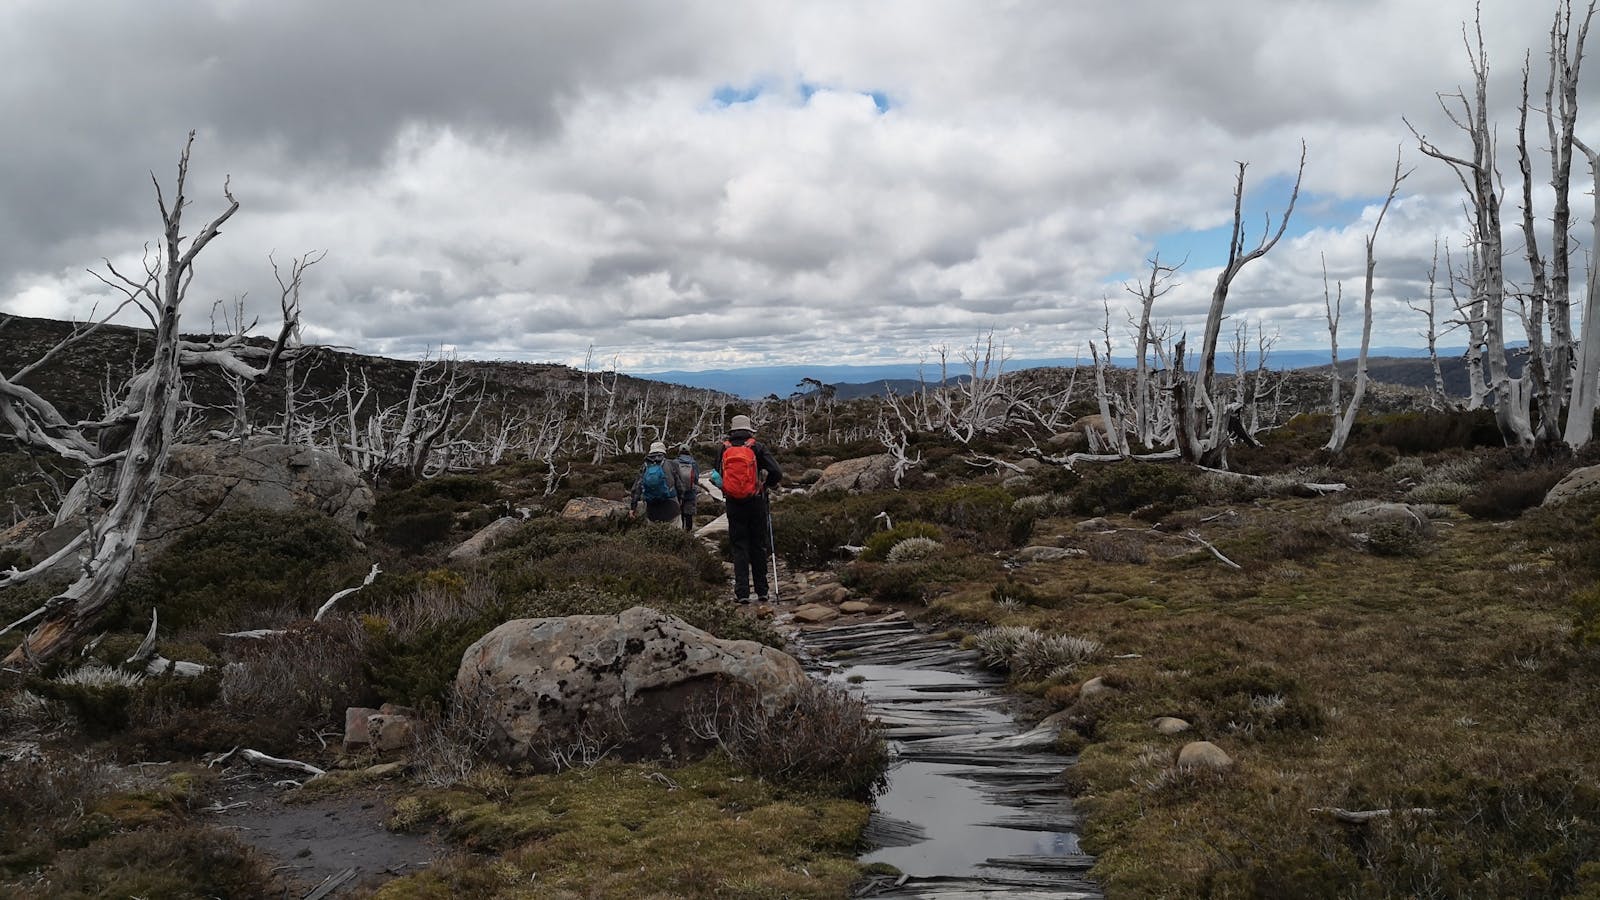 Mt Field NP on the Lake Pedder & South West Wilderness Pack-Free Walk by Life's An Adventure